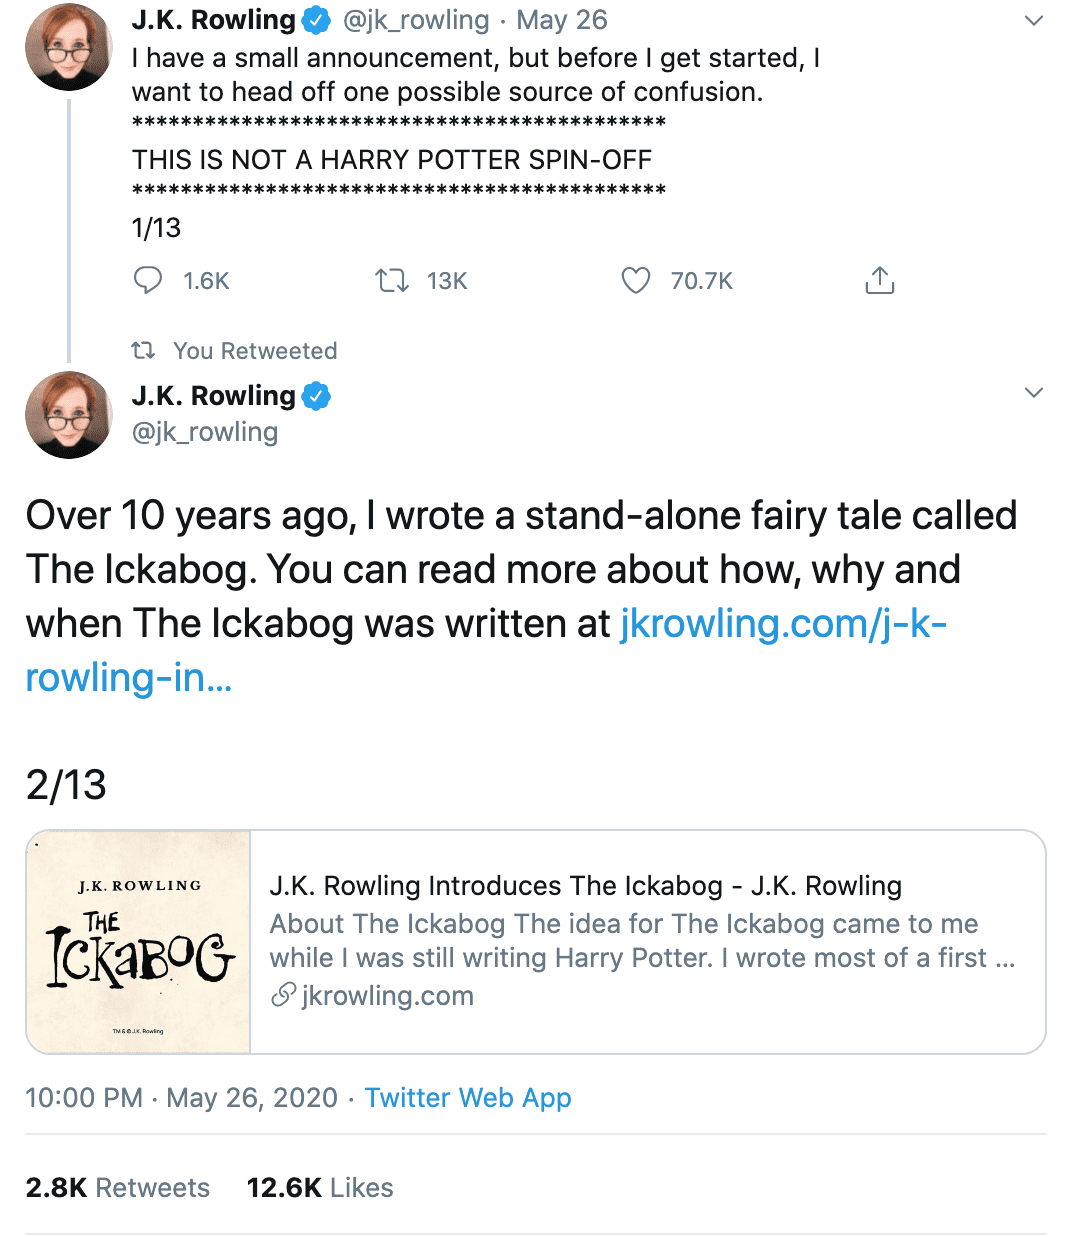 J.K. Rowling tweets about The Ickabog